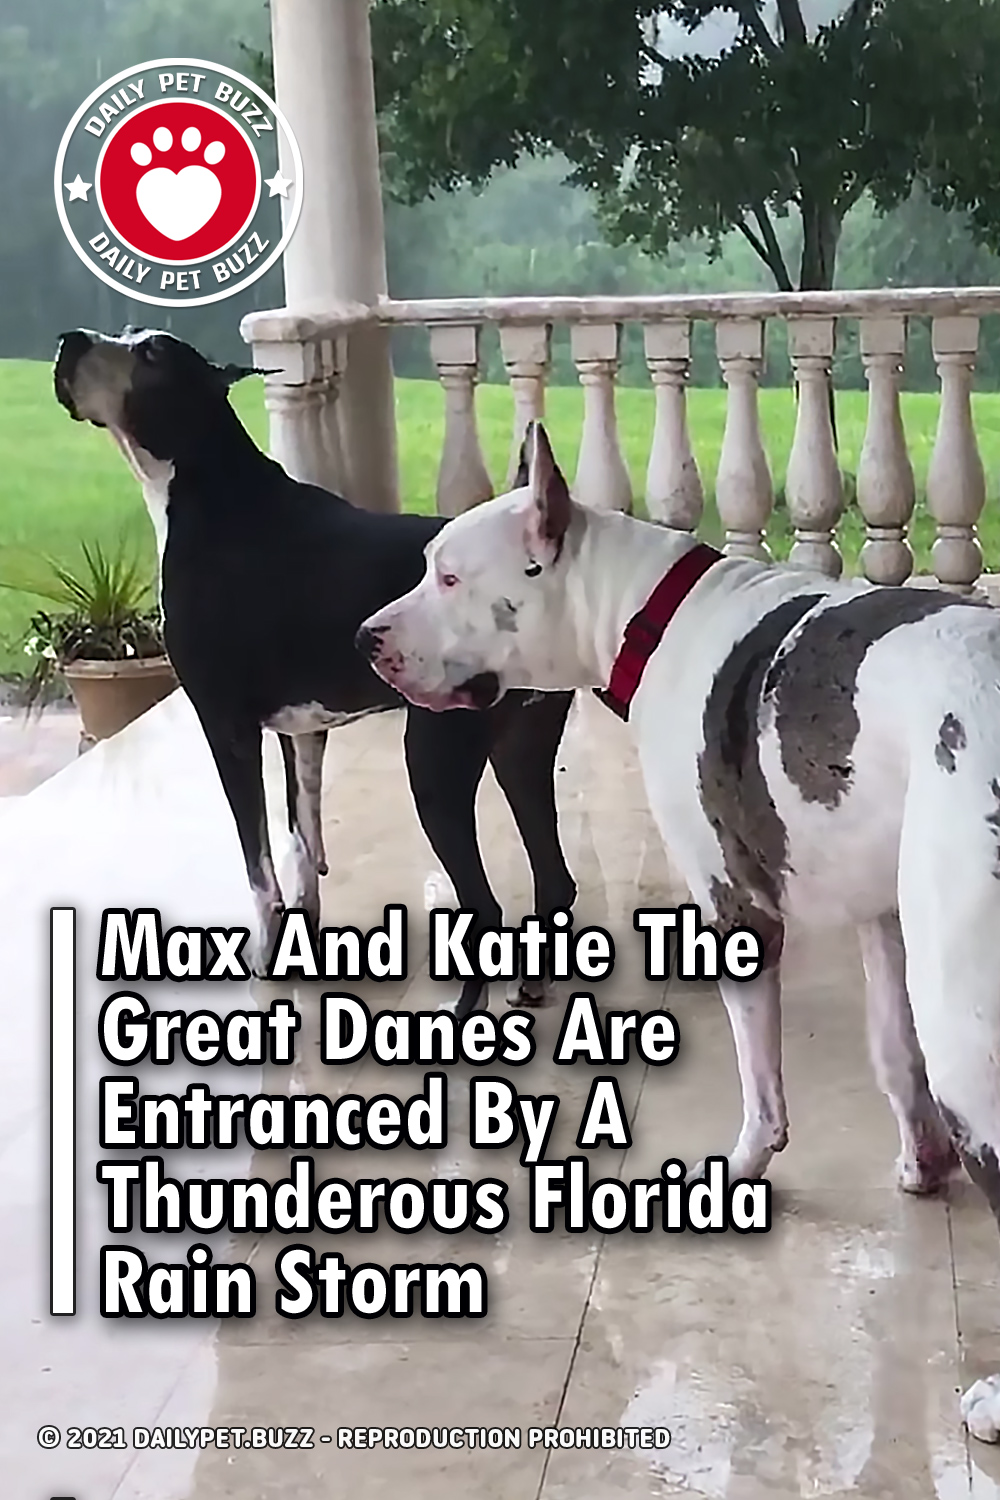 Max And Katie The Great Danes Are Entranced By A Thunderous Florida Rain Storm